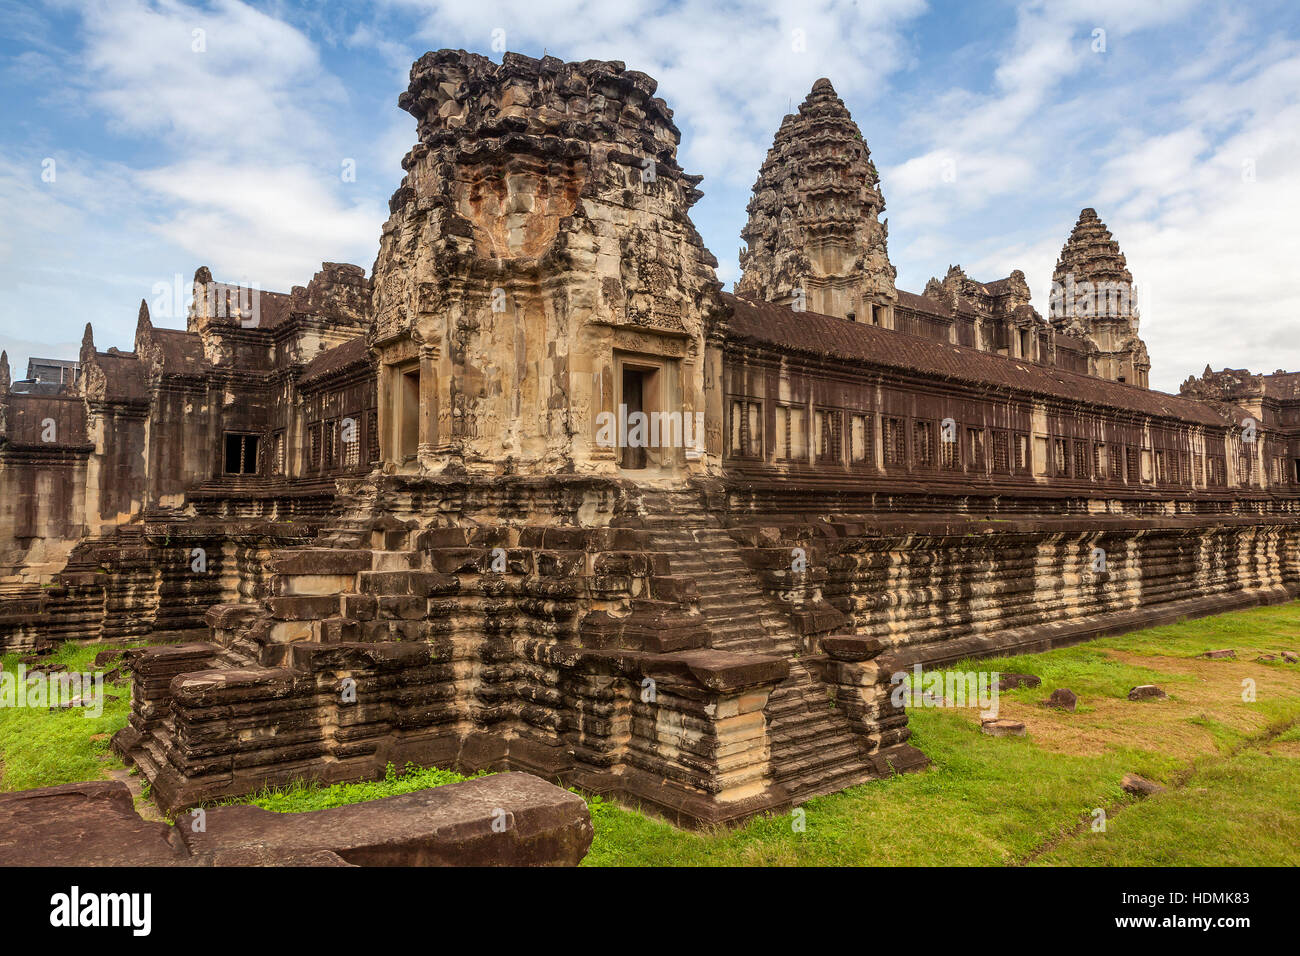 Interior section of the 12th century Khmer temple complex at Angkor Wat, Siem Reap, Kingdom of Cambodia. Stock Photo